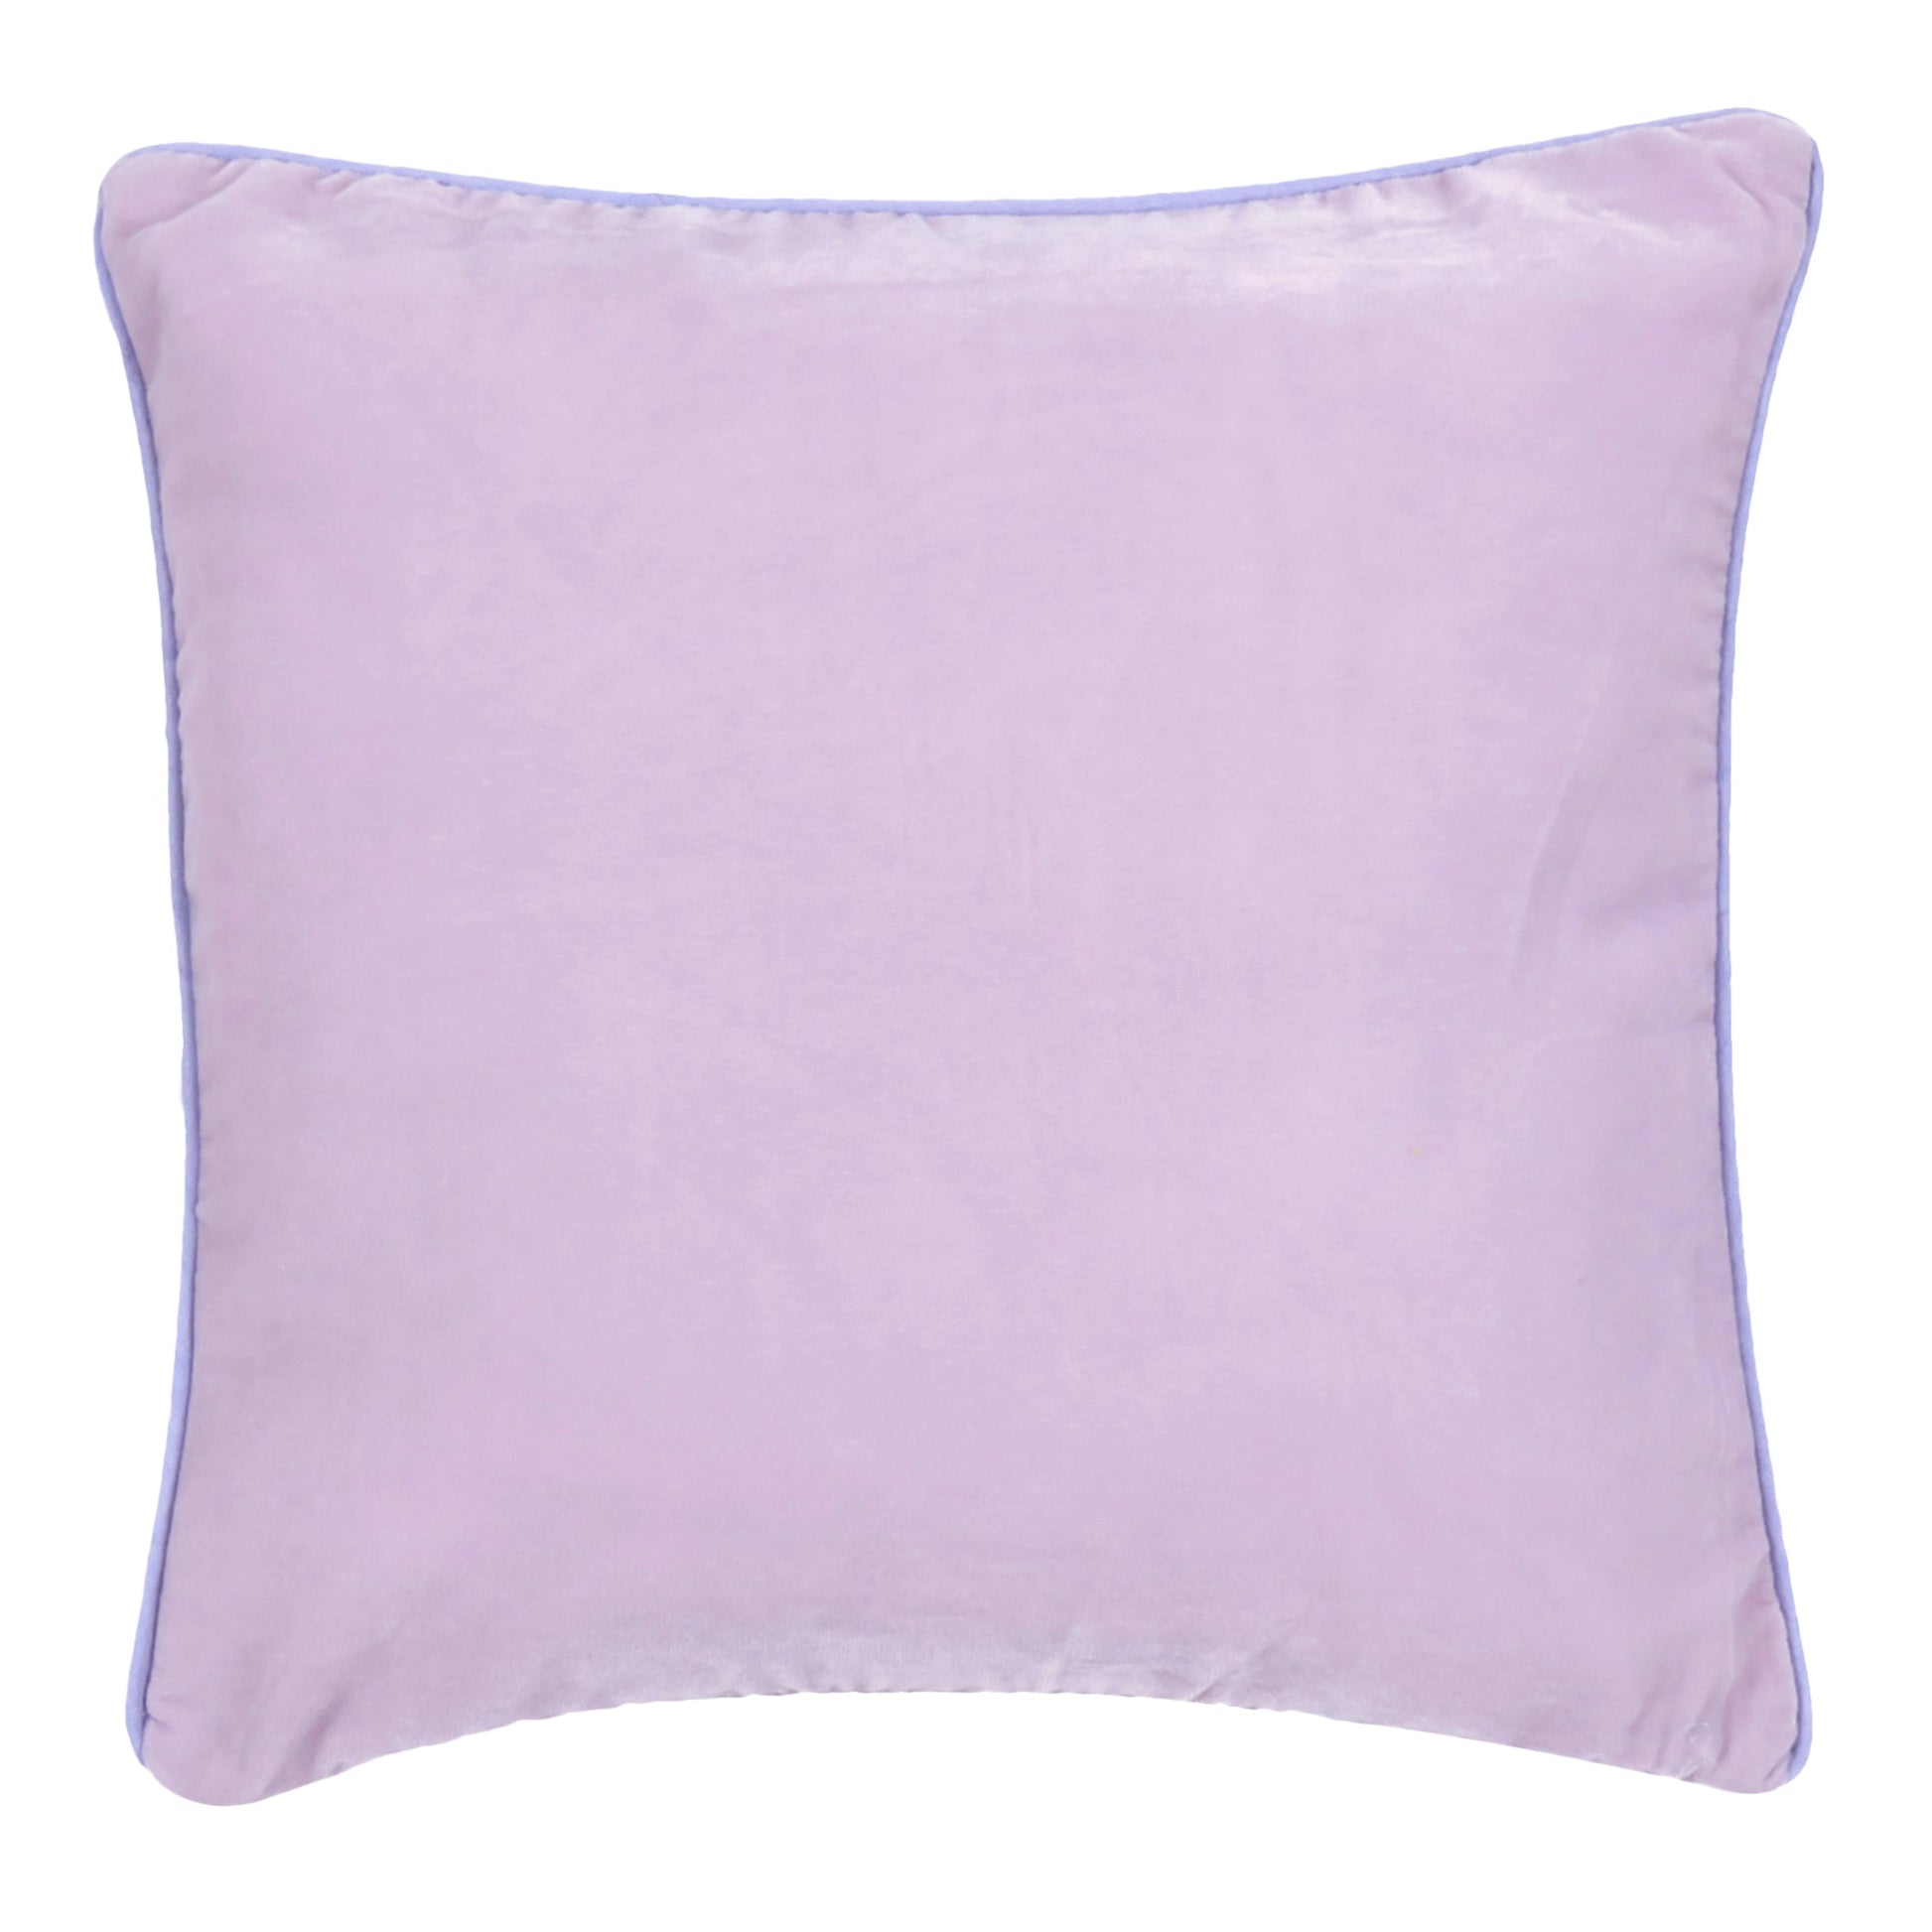 Orchid Bloom Velvet Cushion Cover with Orchid Bloom Piping Edge in Set of 2